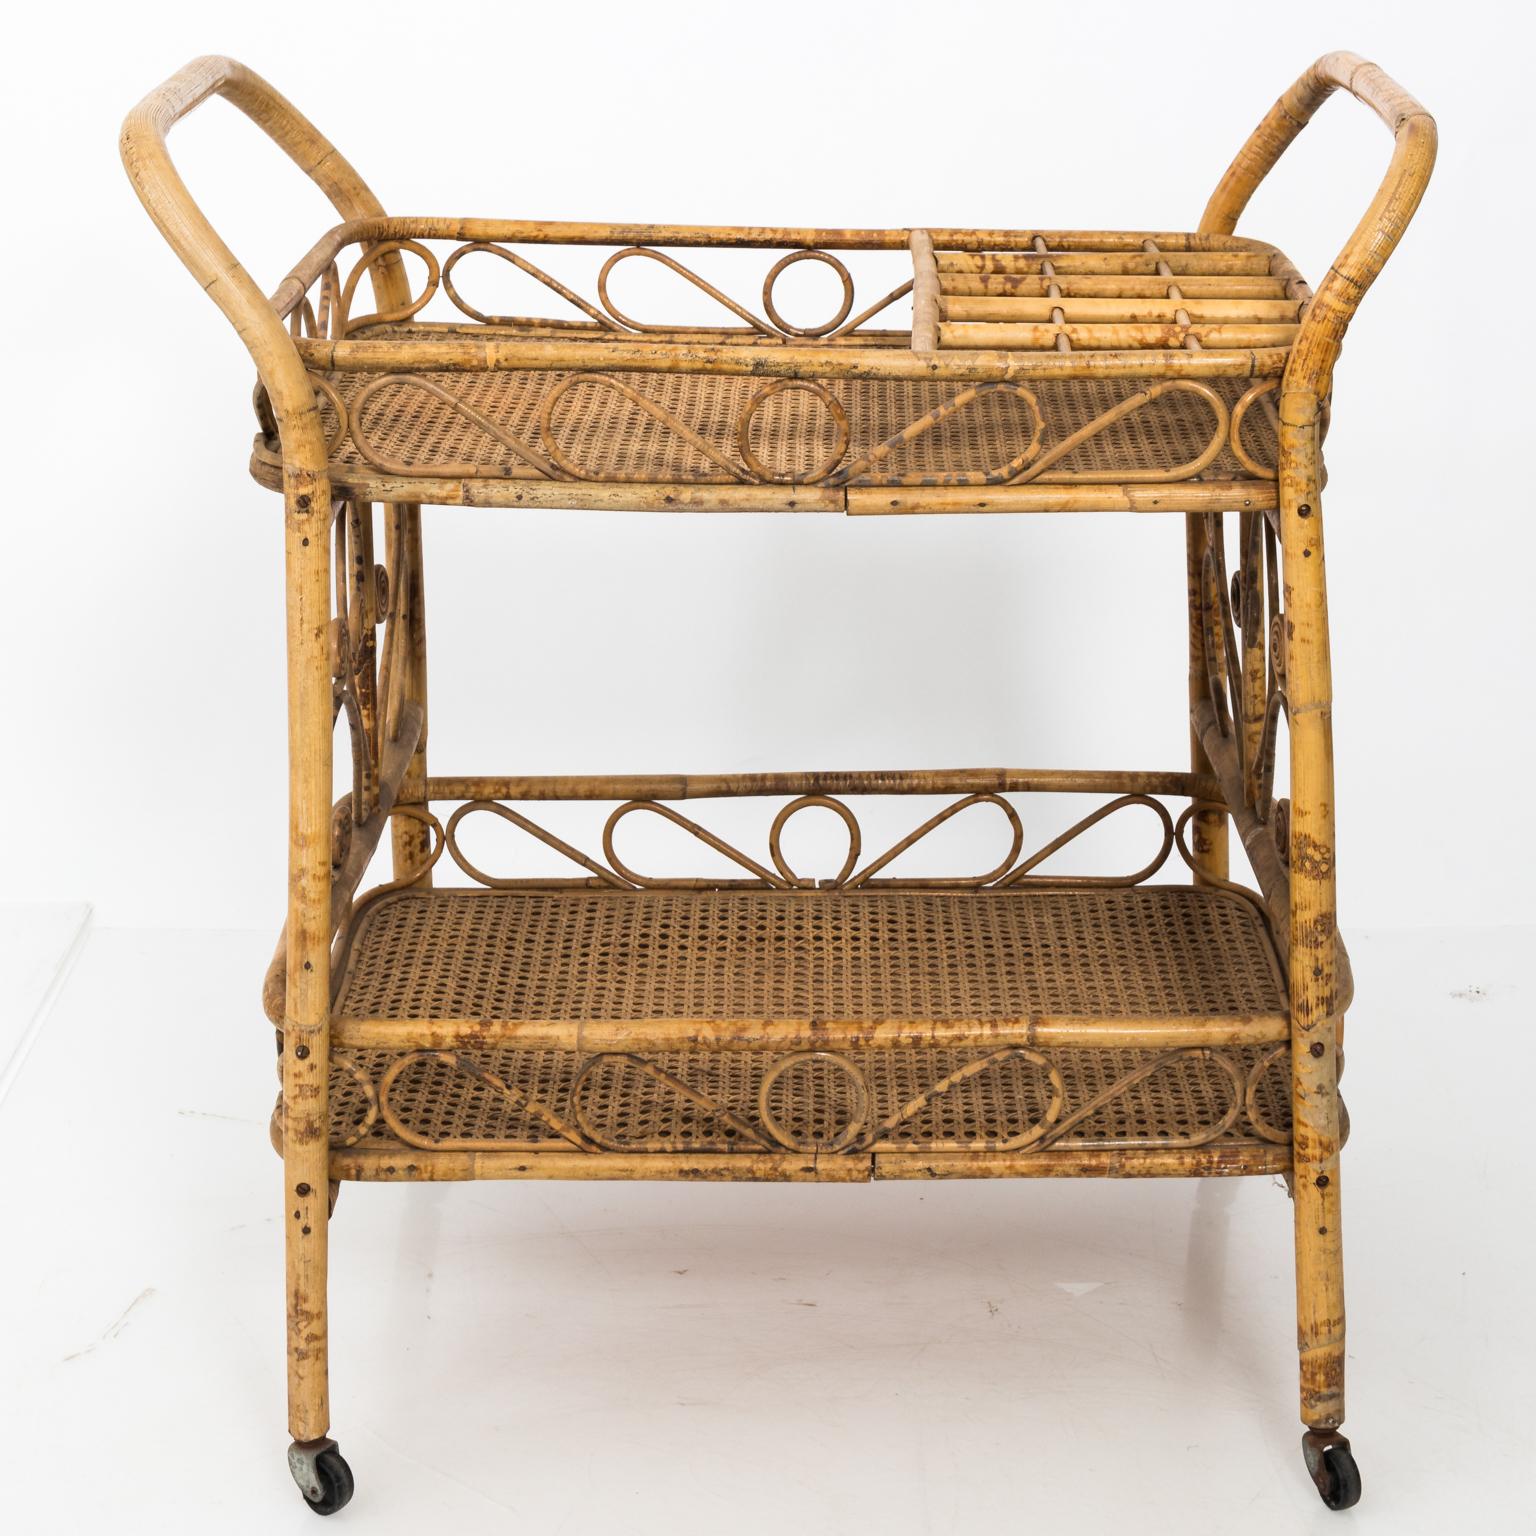 Vintage wicker bat car on wheels with cane woven tabletop and bamboo frame, circa mid-20th century. Please note of wear consistent with age.
  